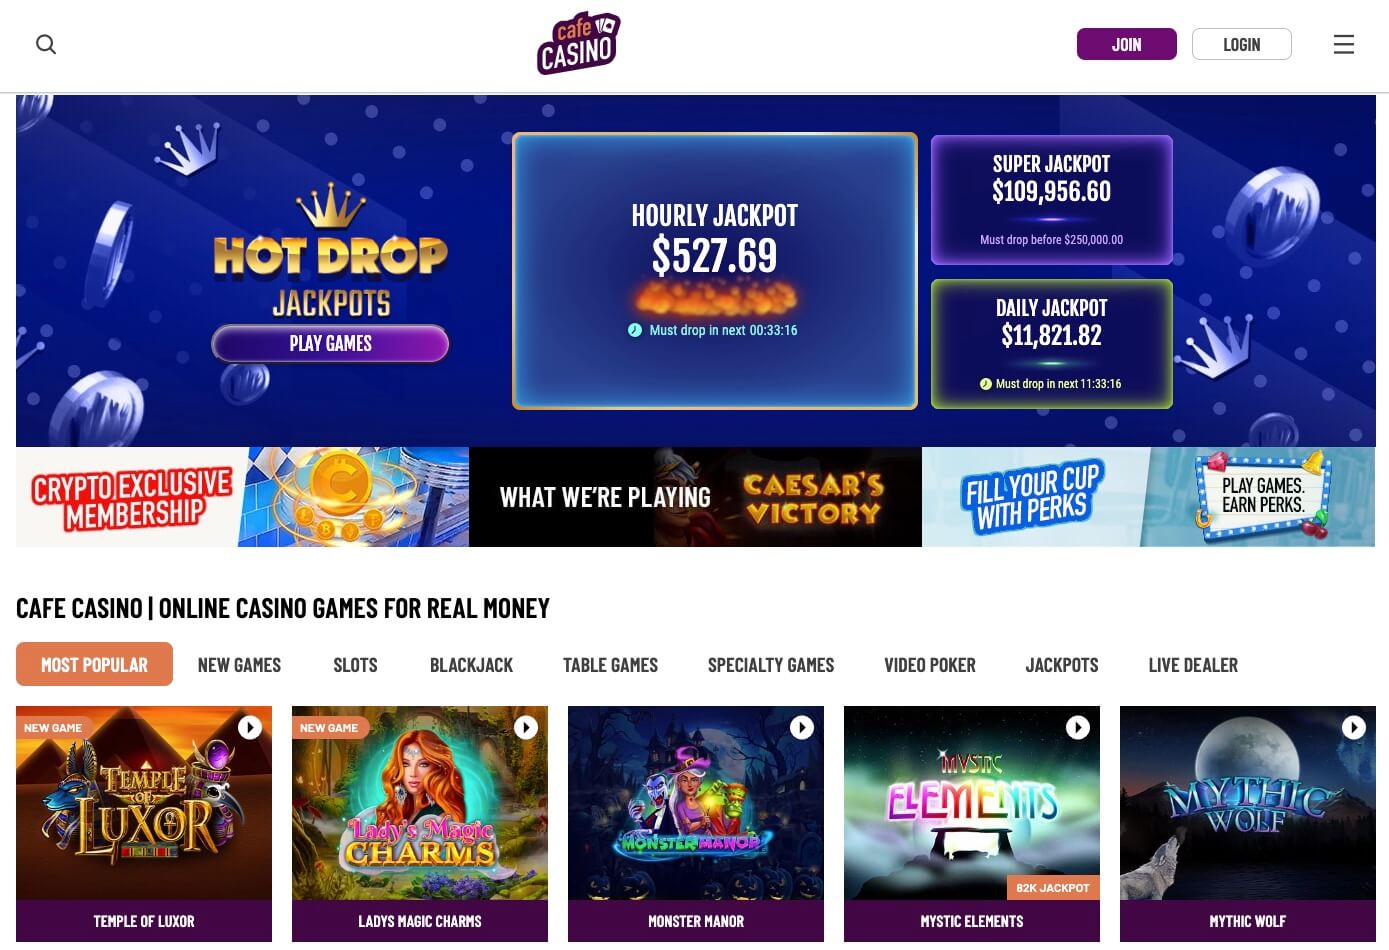 10 DIY bet mgm online casino Tips You May Have Missed